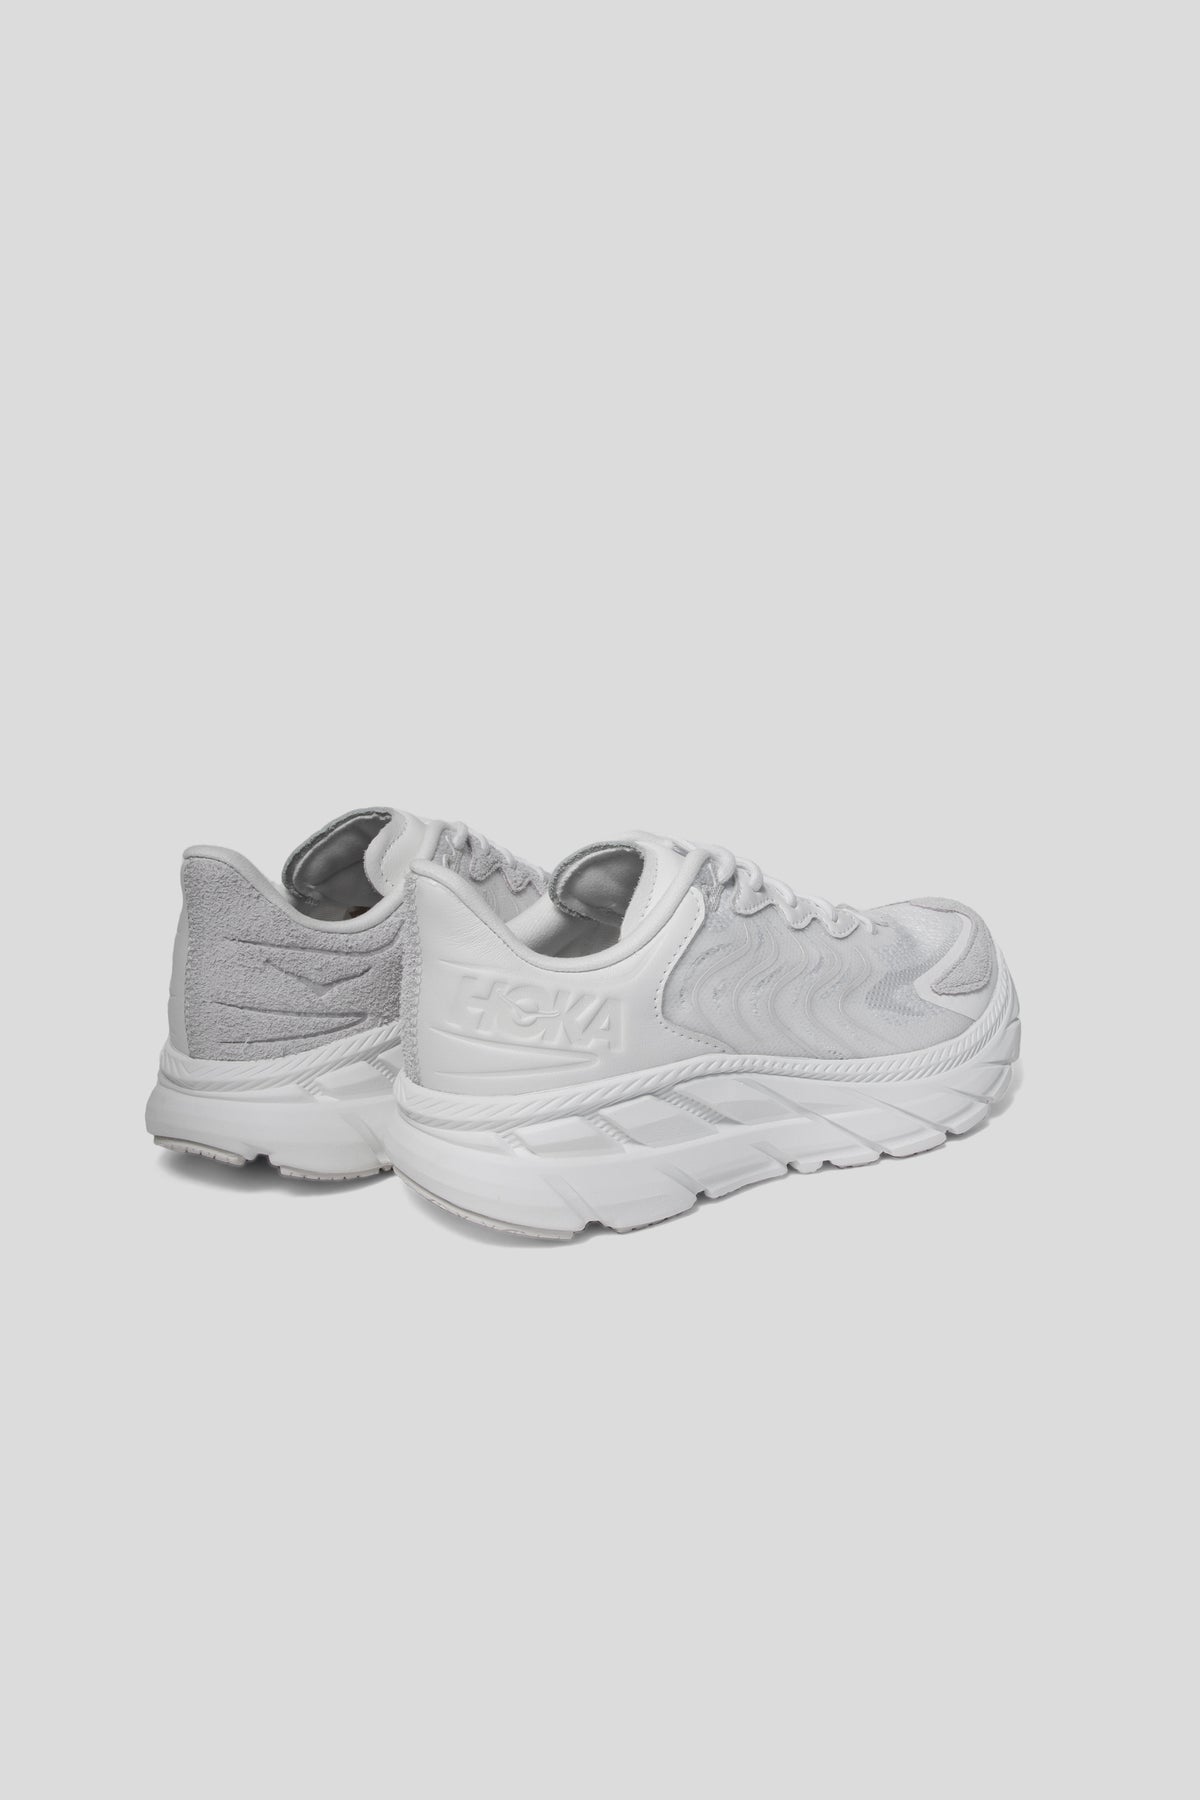 All Gender Clifton LS in White / Nimbus Cloud